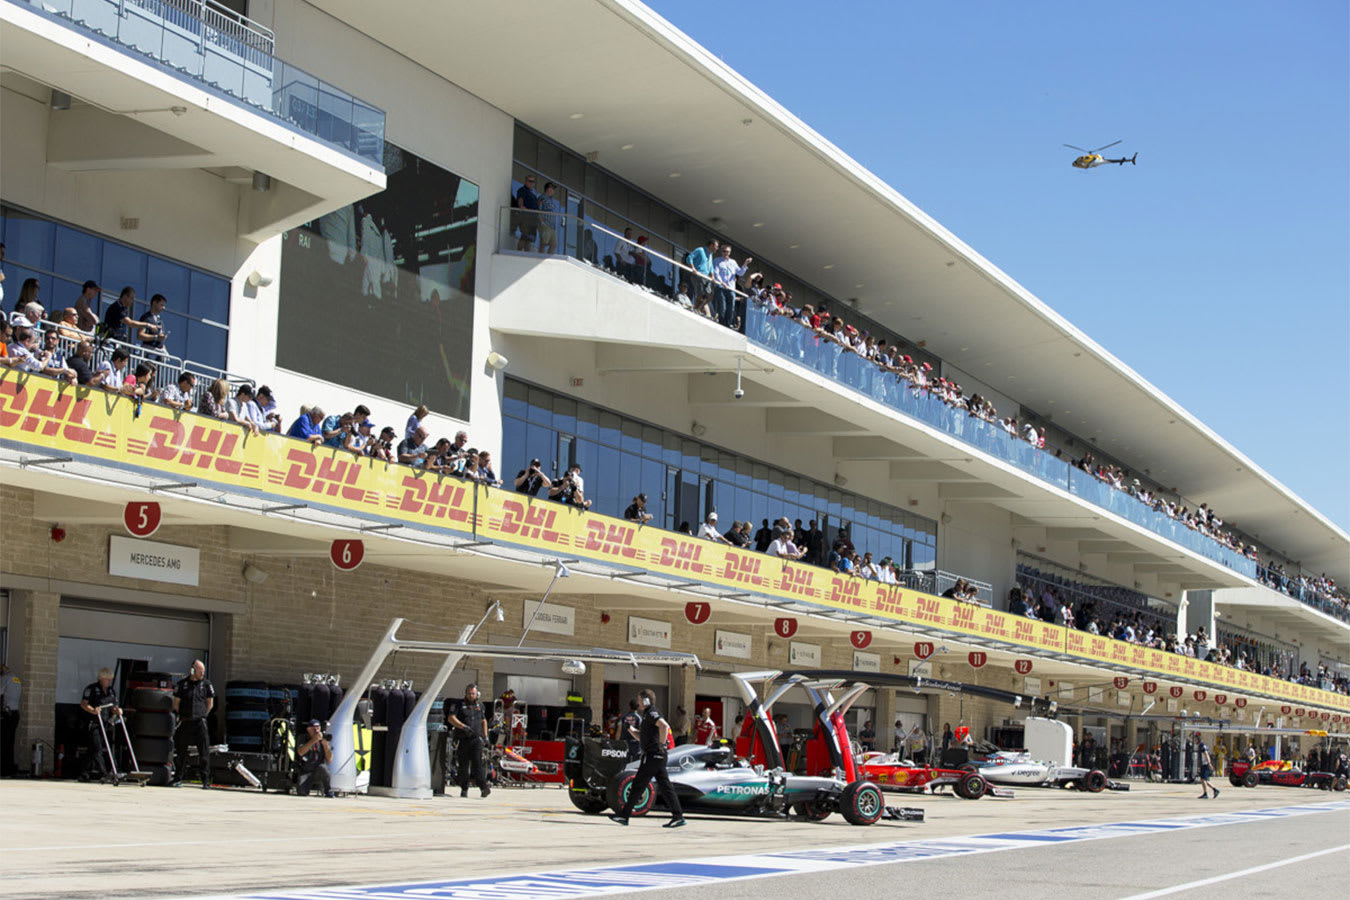 2022 US Grand Prix Packages Enjoy the Austin F1 as a VIP